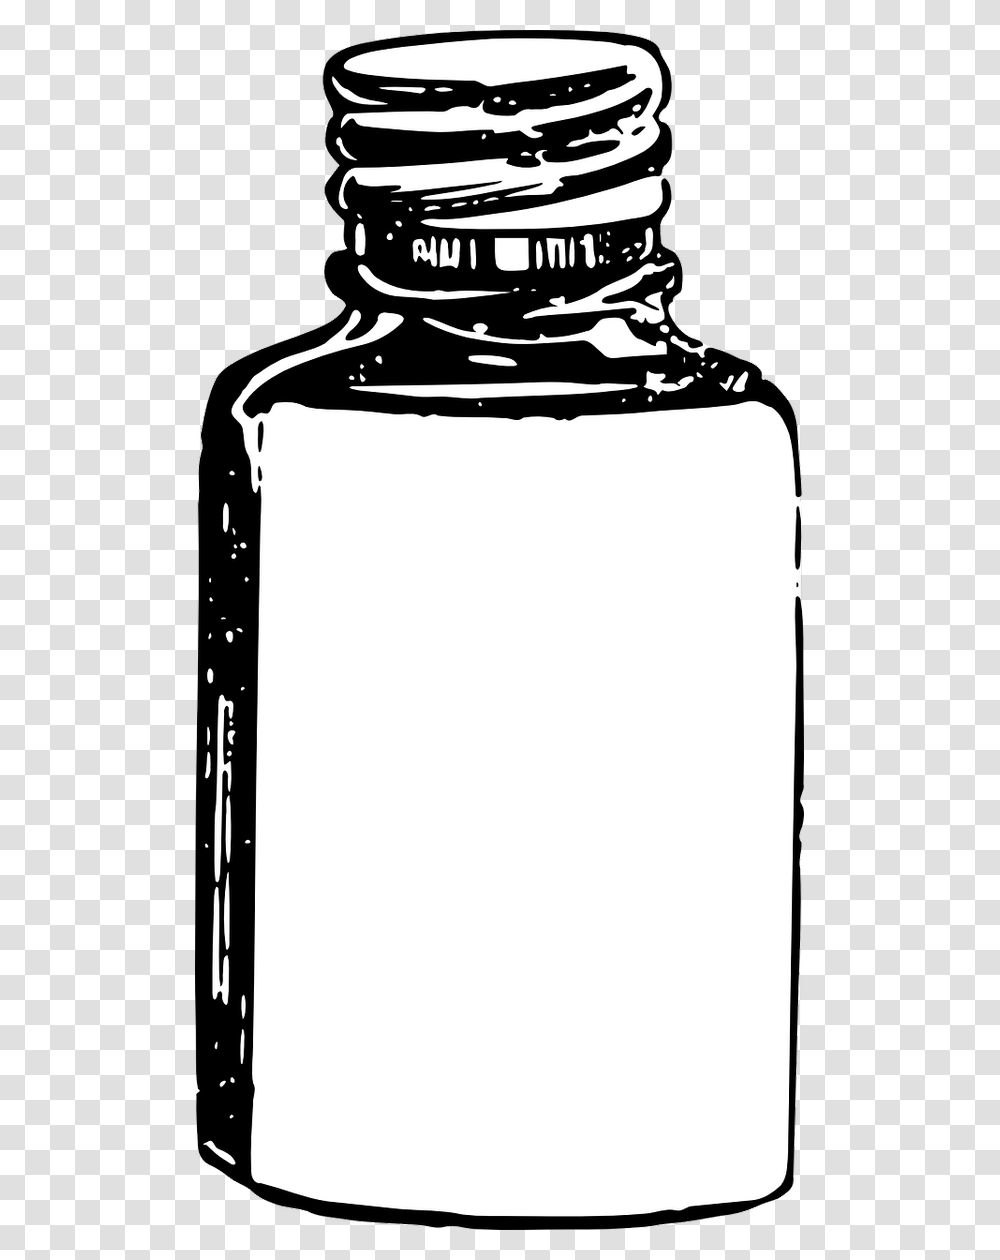 Passow Delaye Berlin On Twitter How To Store The Perfume, Jar, Bottle, Scroll, Ink Bottle Transparent Png